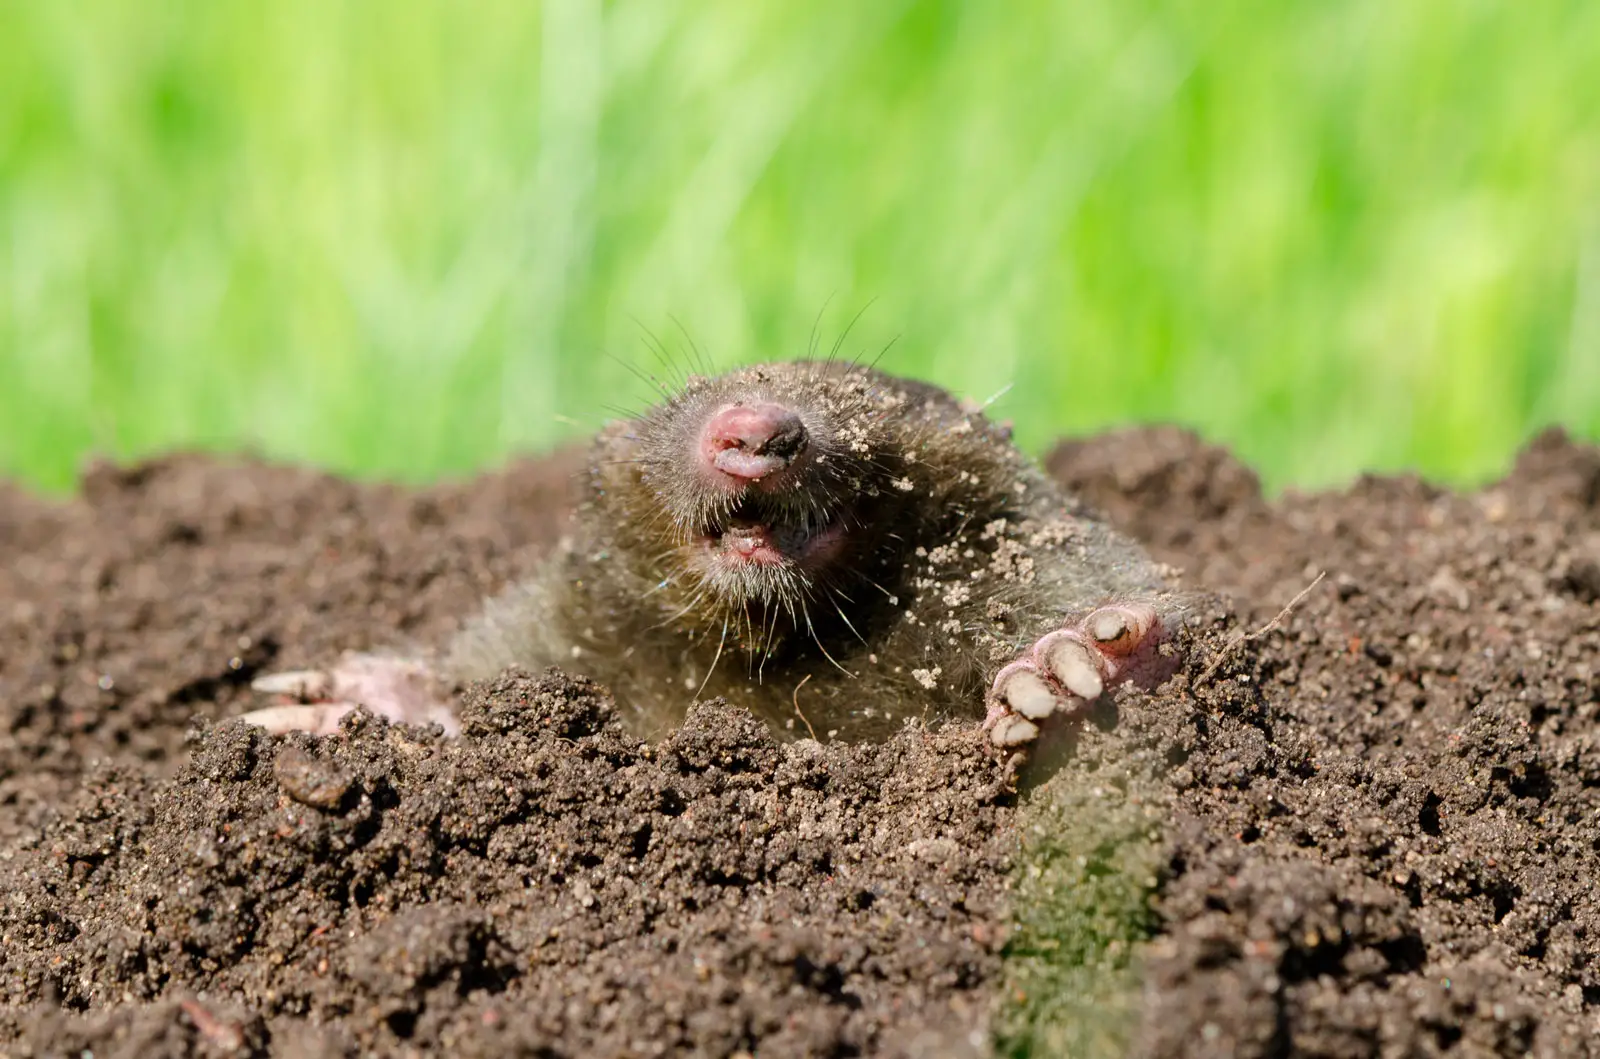 Do Moles Eat Tomatoes? The Answer May Surprise You!